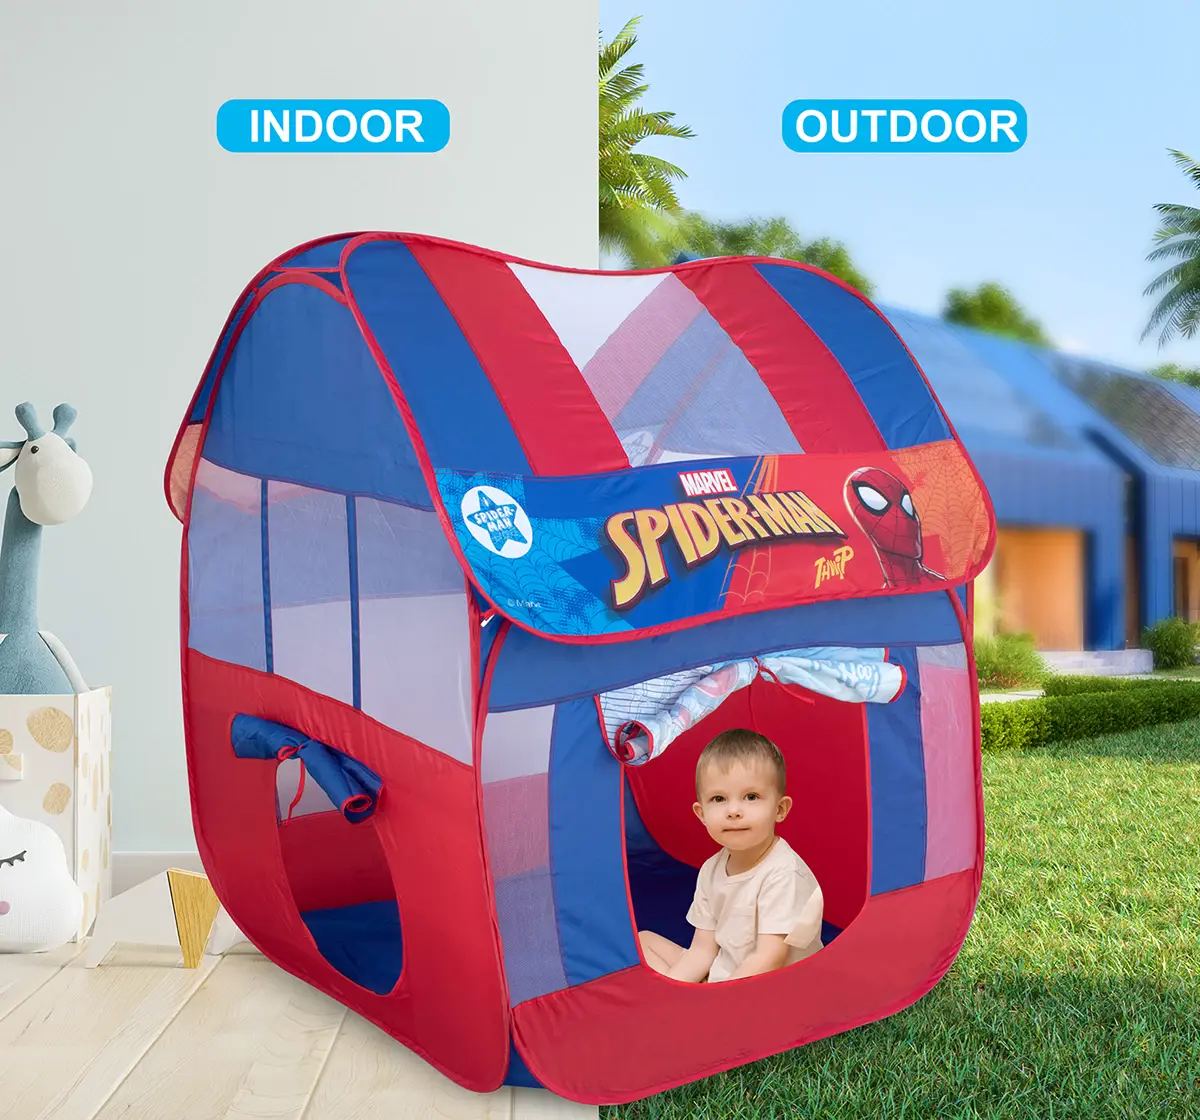 Disney Spiderman Foldable Playhouse Tent for kids Multicolor 24M+